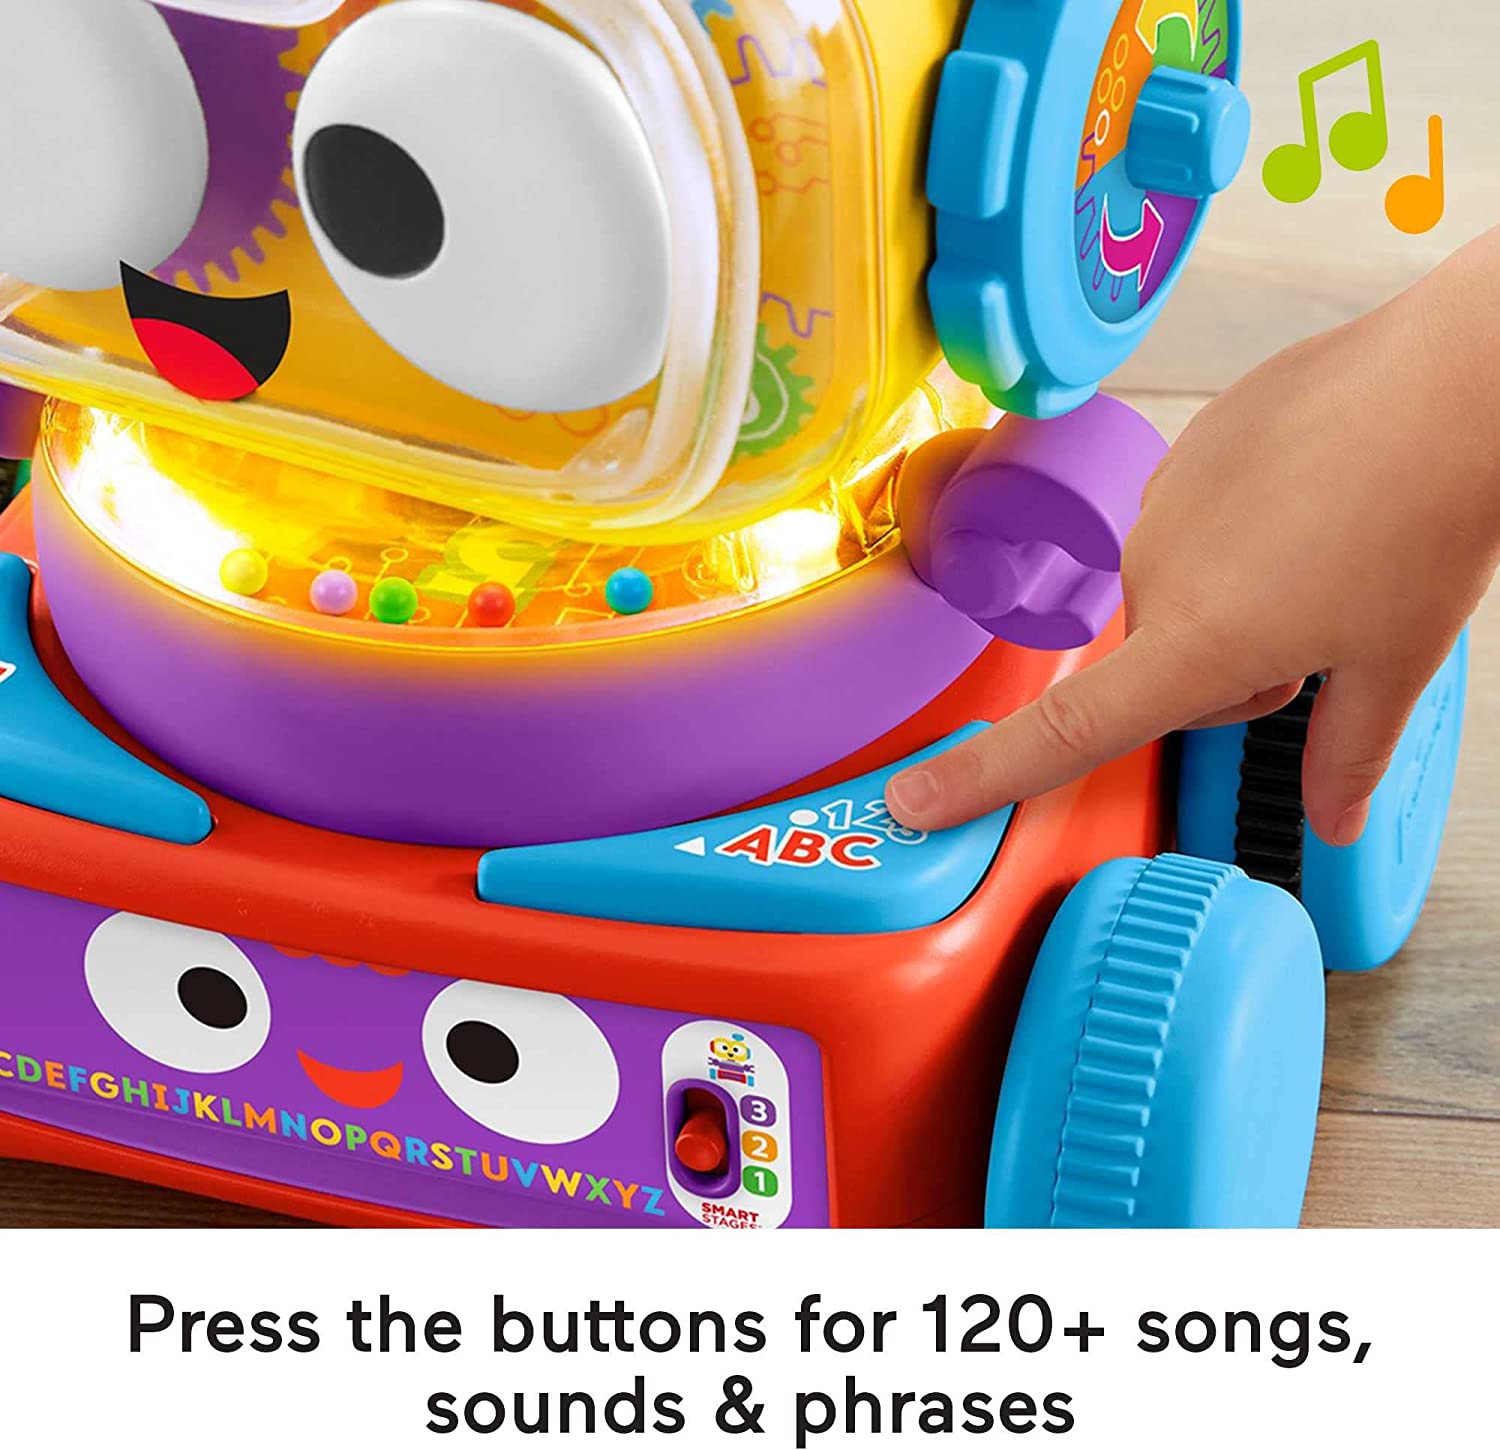 Fisher Price 4in1 Ultimate Learning Bot